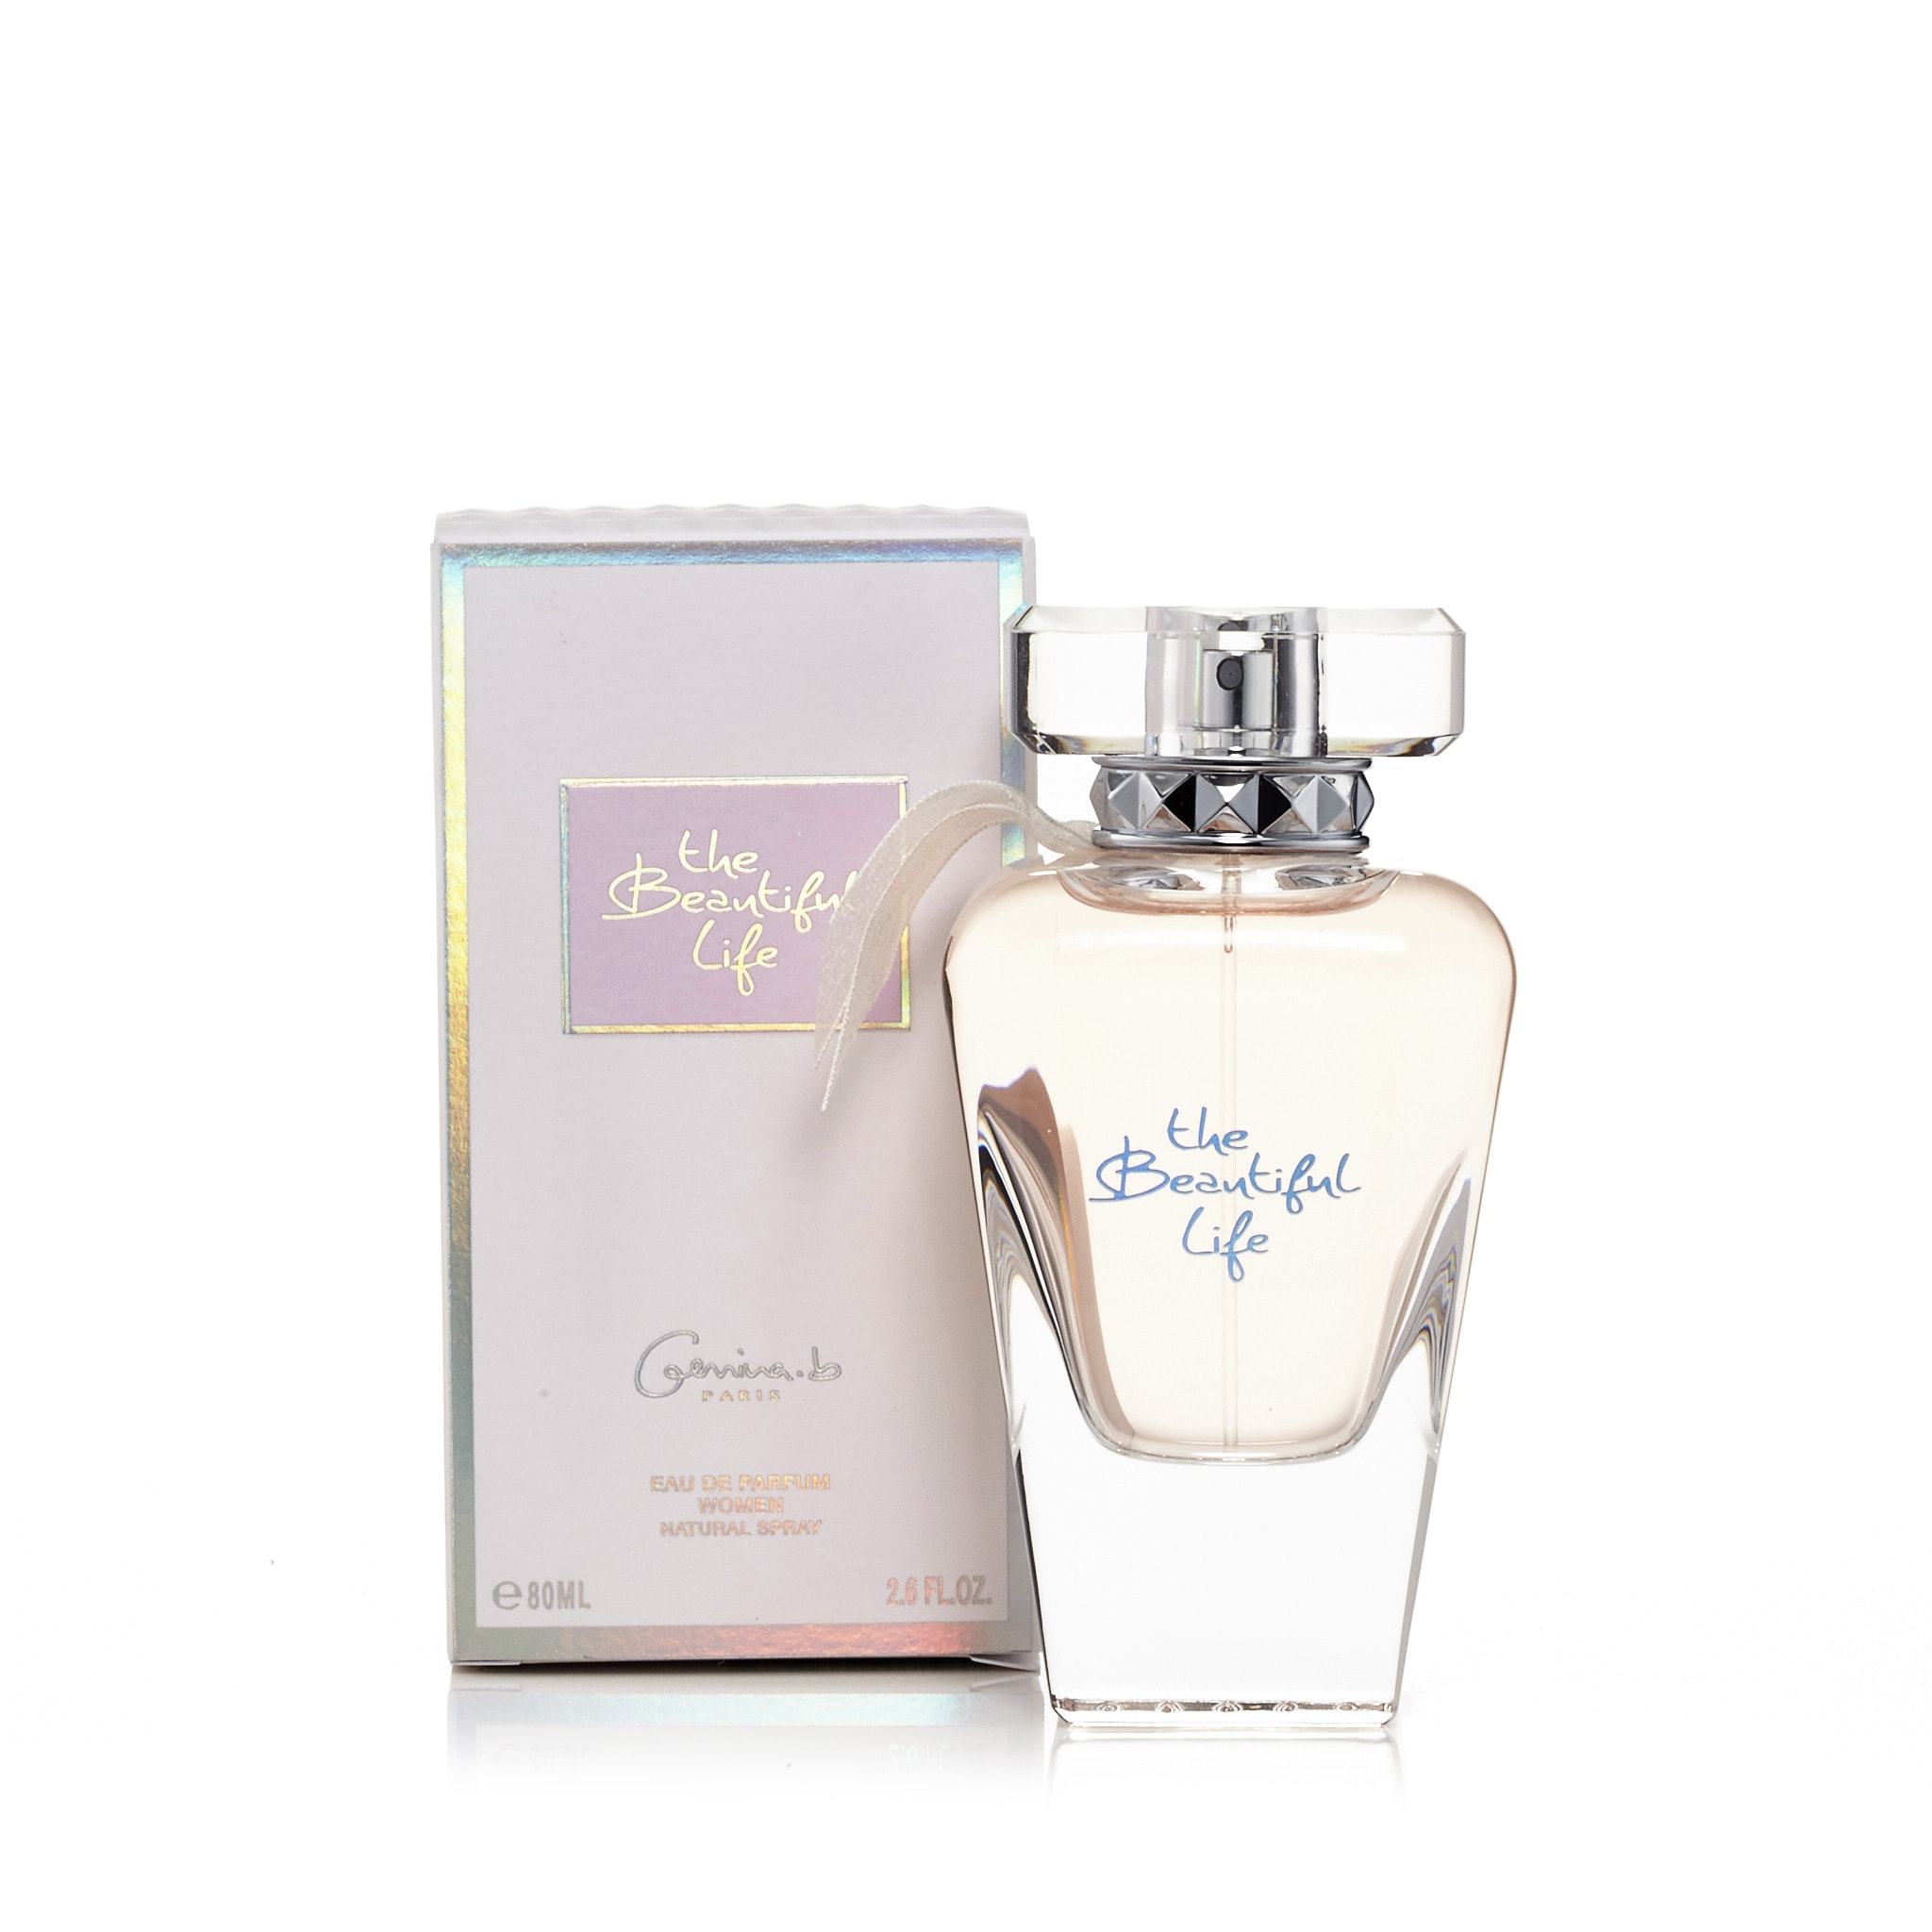 Beauty 'n' Beach by Lovance » Reviews & Perfume Facts